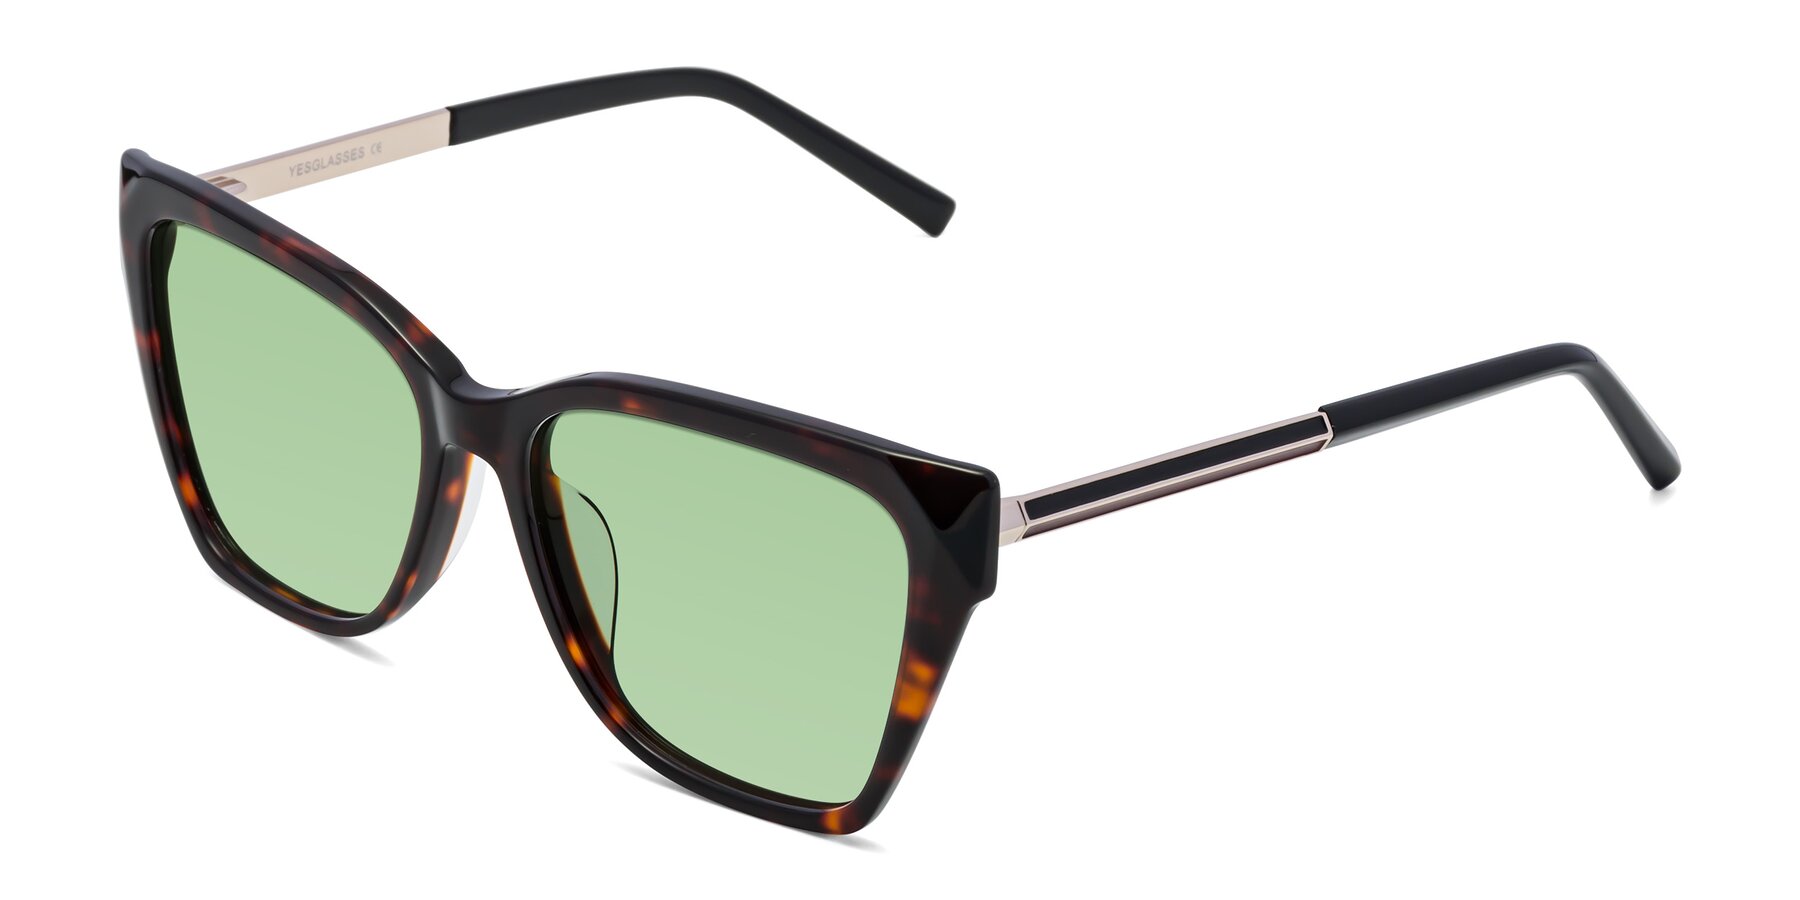 Angle of Swartz in Tortoise with Medium Green Tinted Lenses